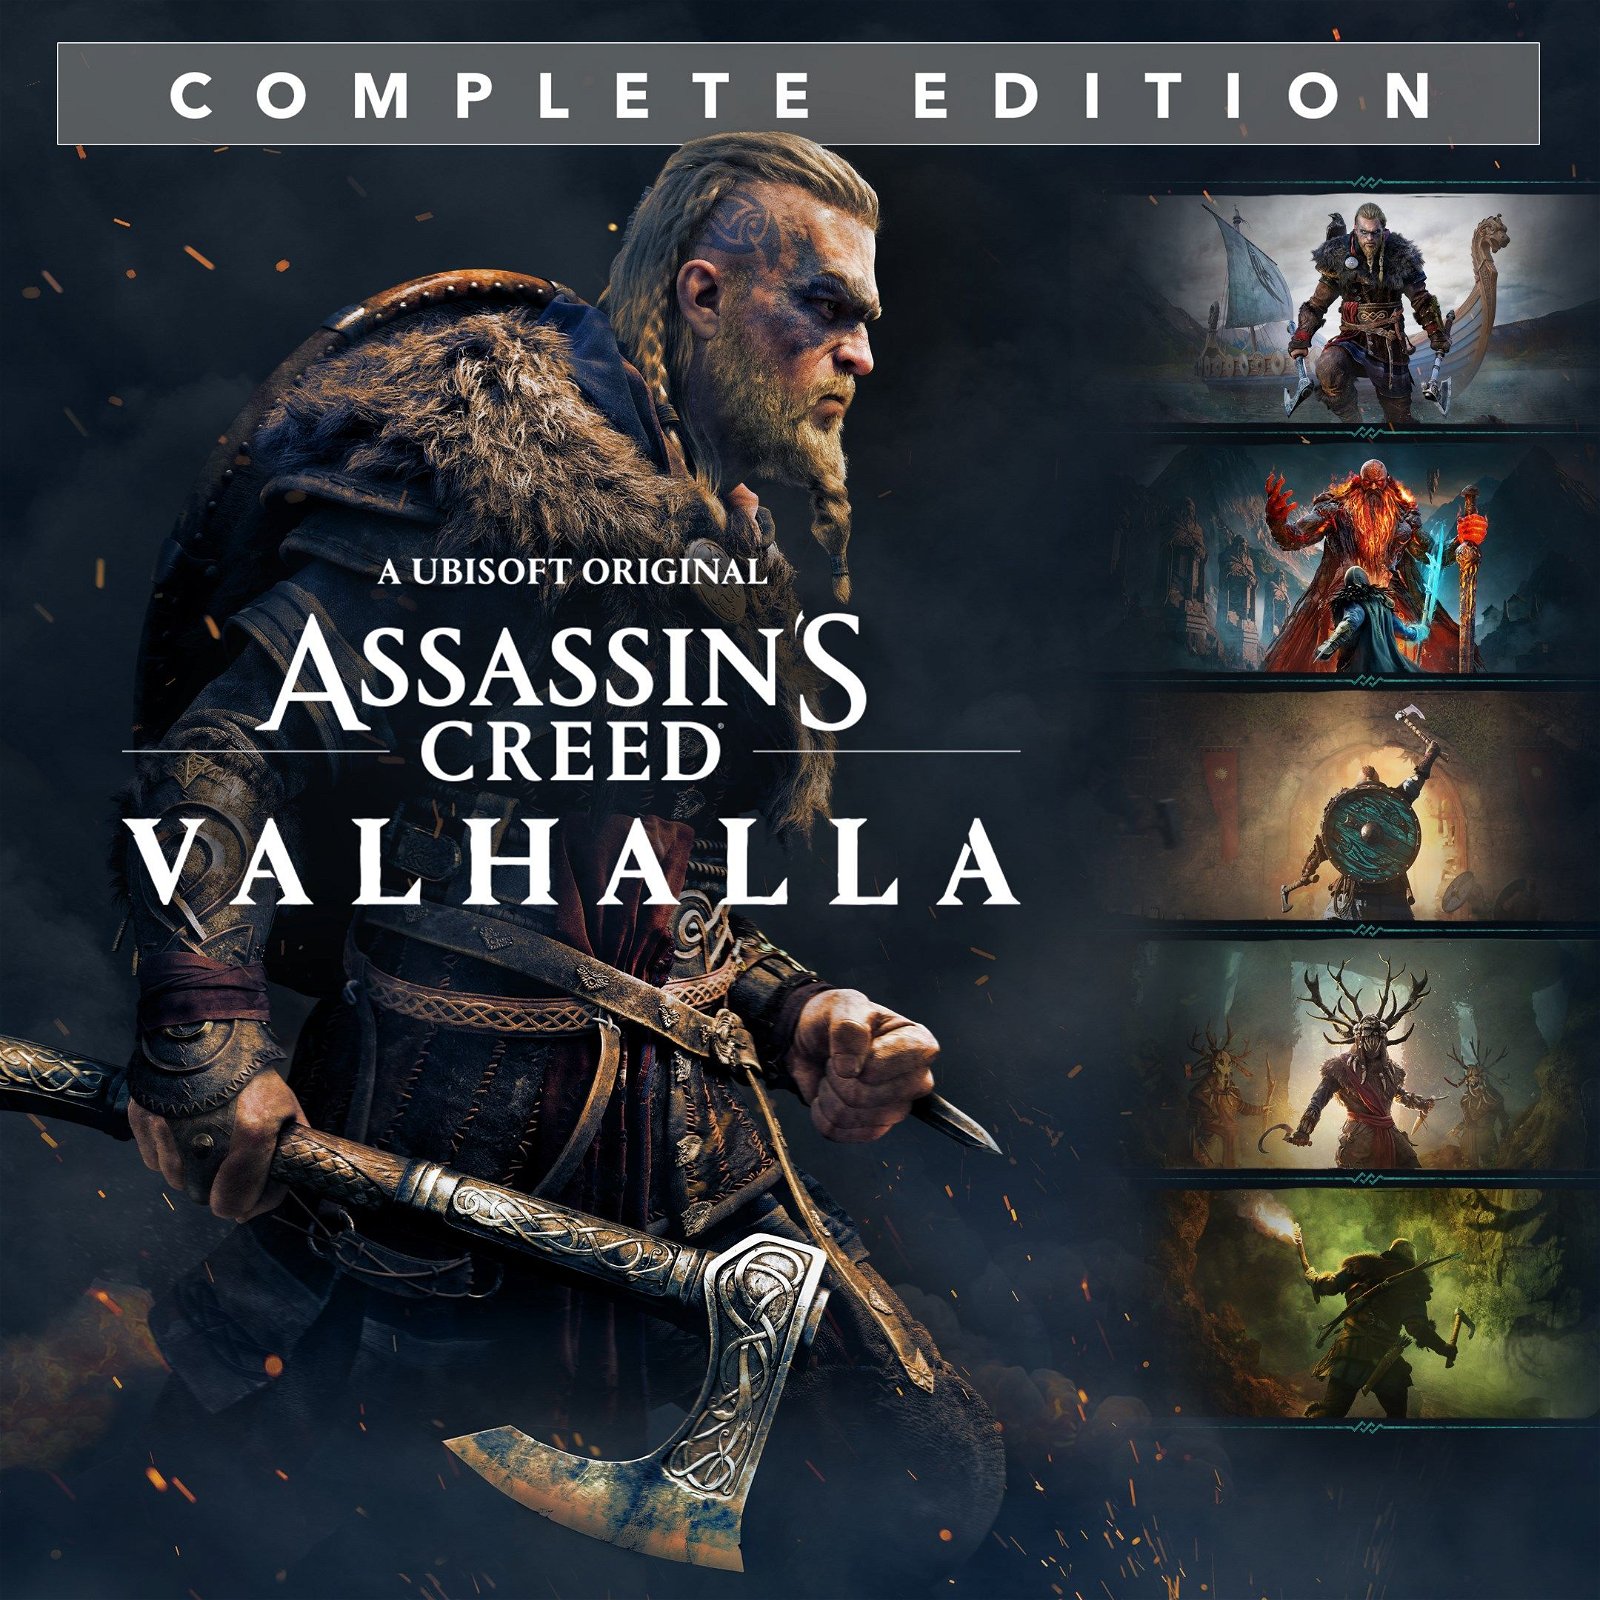 Image of Assassin's Creed Valhalla Complete Edition